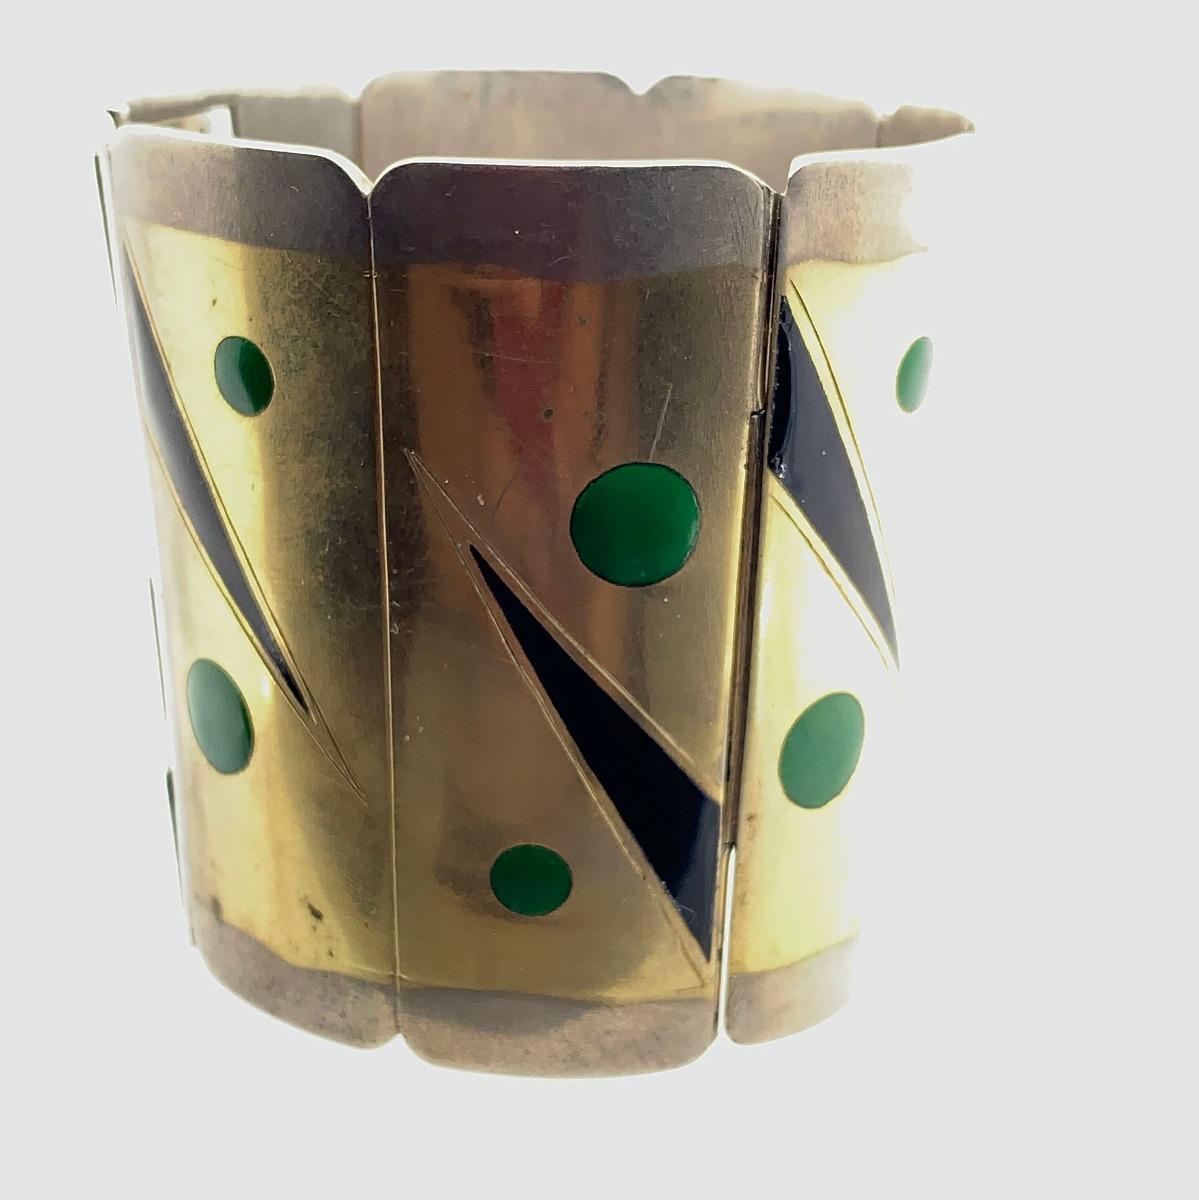 Material: Tapering hinged cuff with black and green enamel
Maker's mark: GC
Condition: Good
Year Of manufacture: 1930
Gemstone: N/A
Total item Weight: 161 grams
Length: 4.14 inches
Interior Circumference: 7 inches
Articulated fringe
551